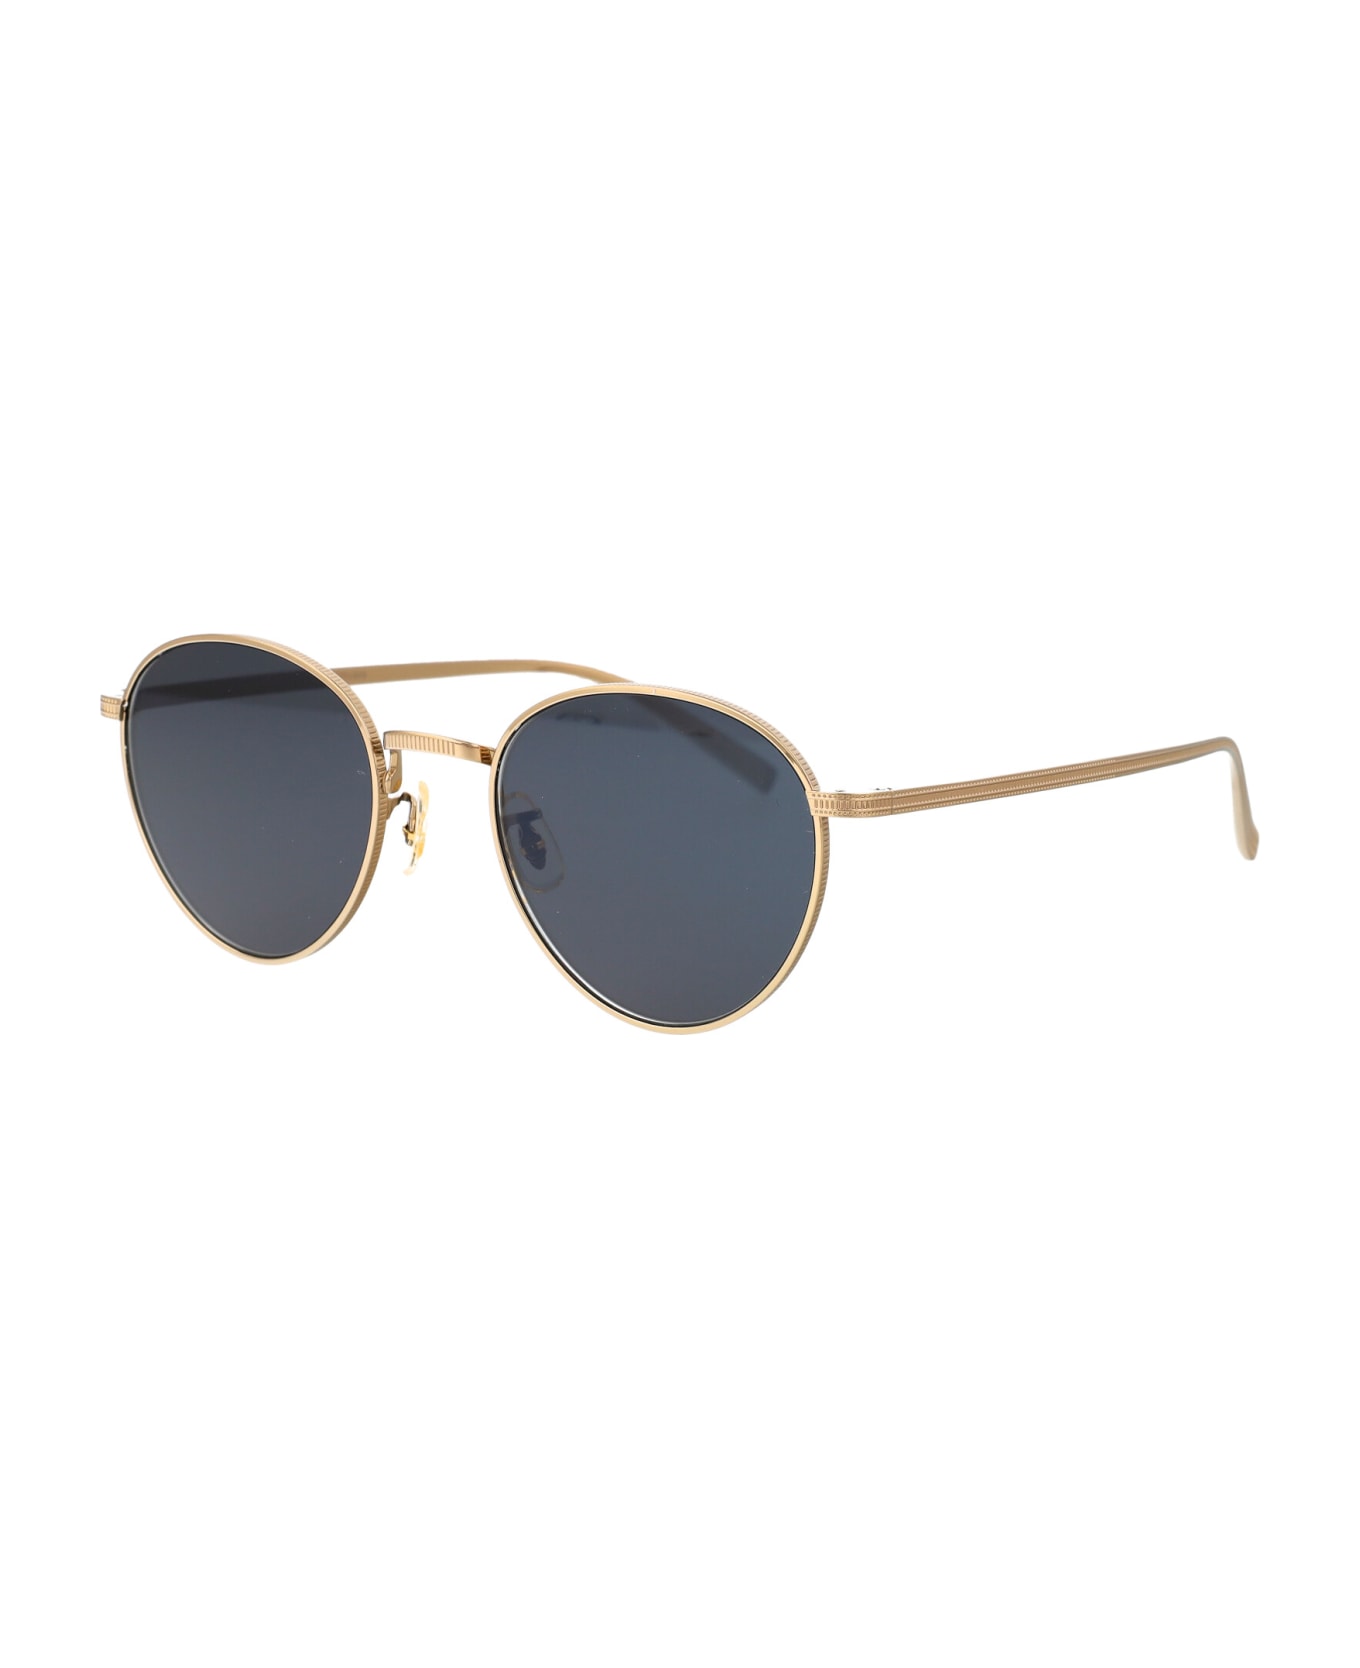 Oliver Peoples Rhydian Sunglasses - 5035R5 Gold